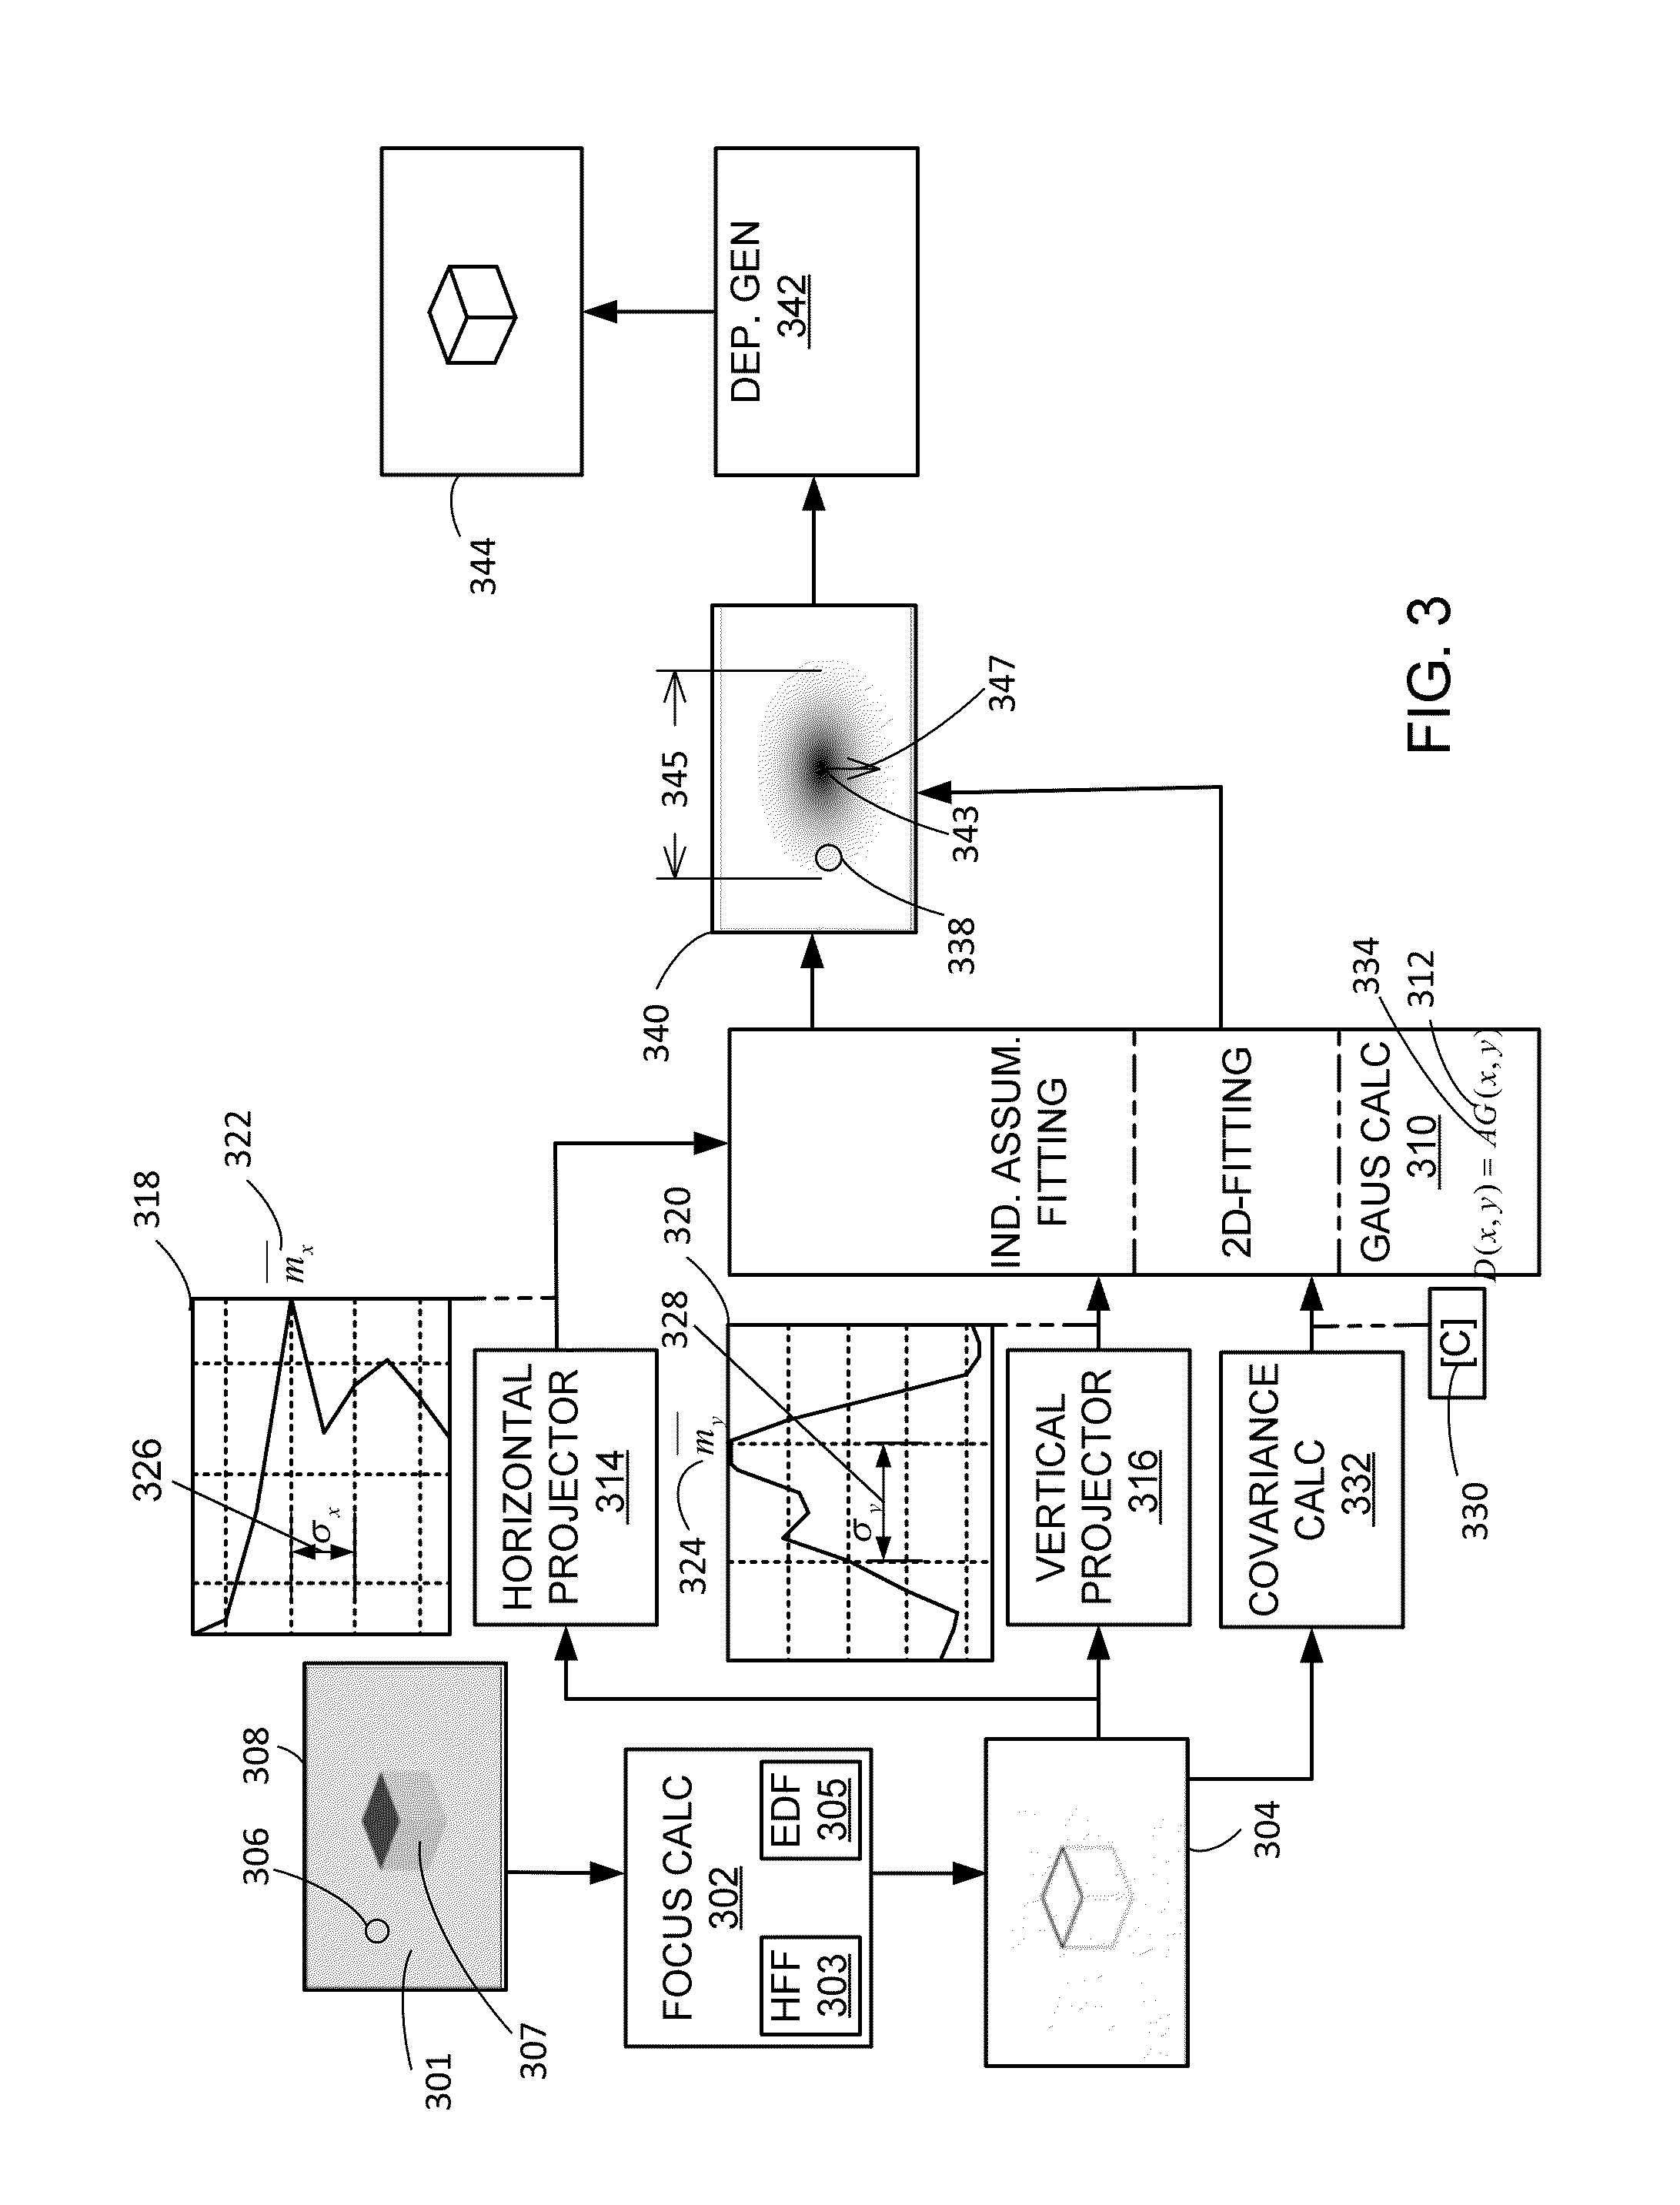 Depth estimation system for two-dimensional images and method of operation thereof